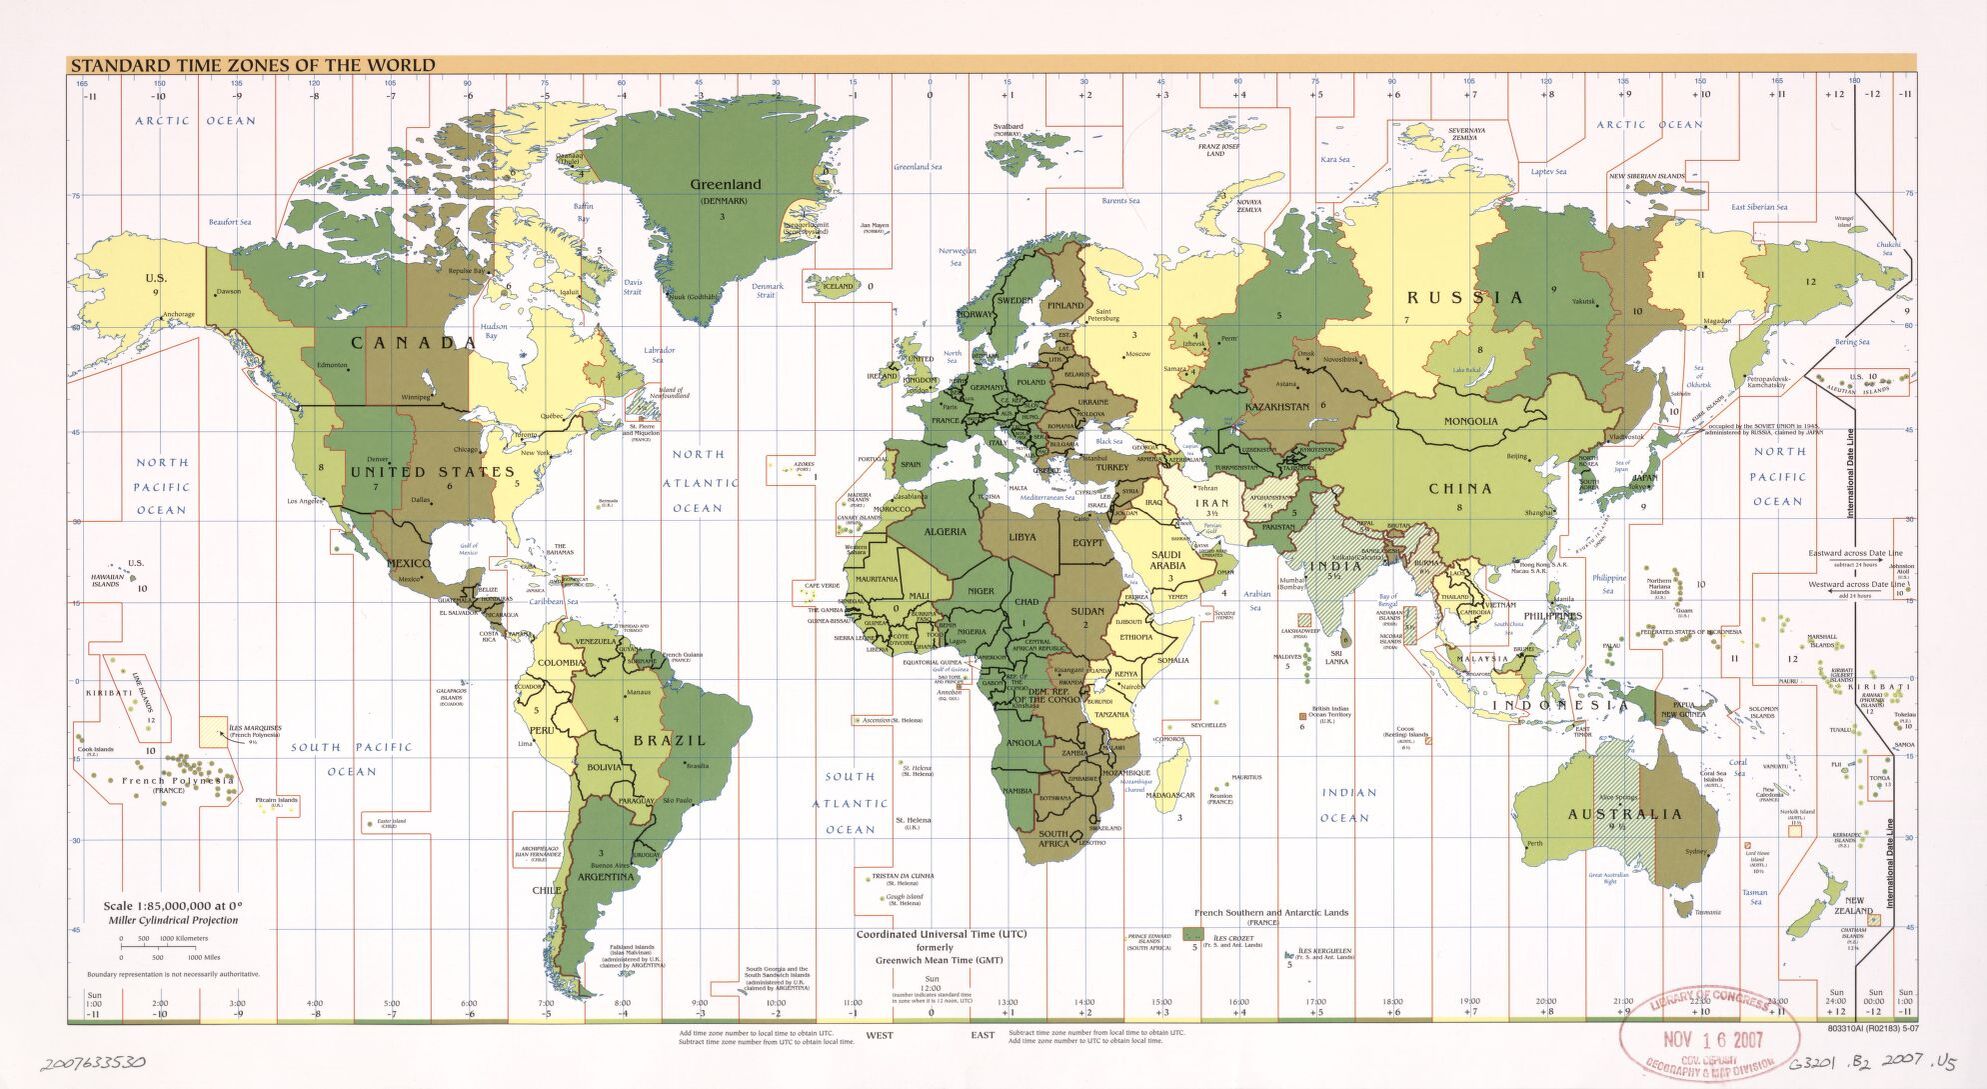 The World Standard time zones Map   | 2007 | Large, Printable Downloadable Map